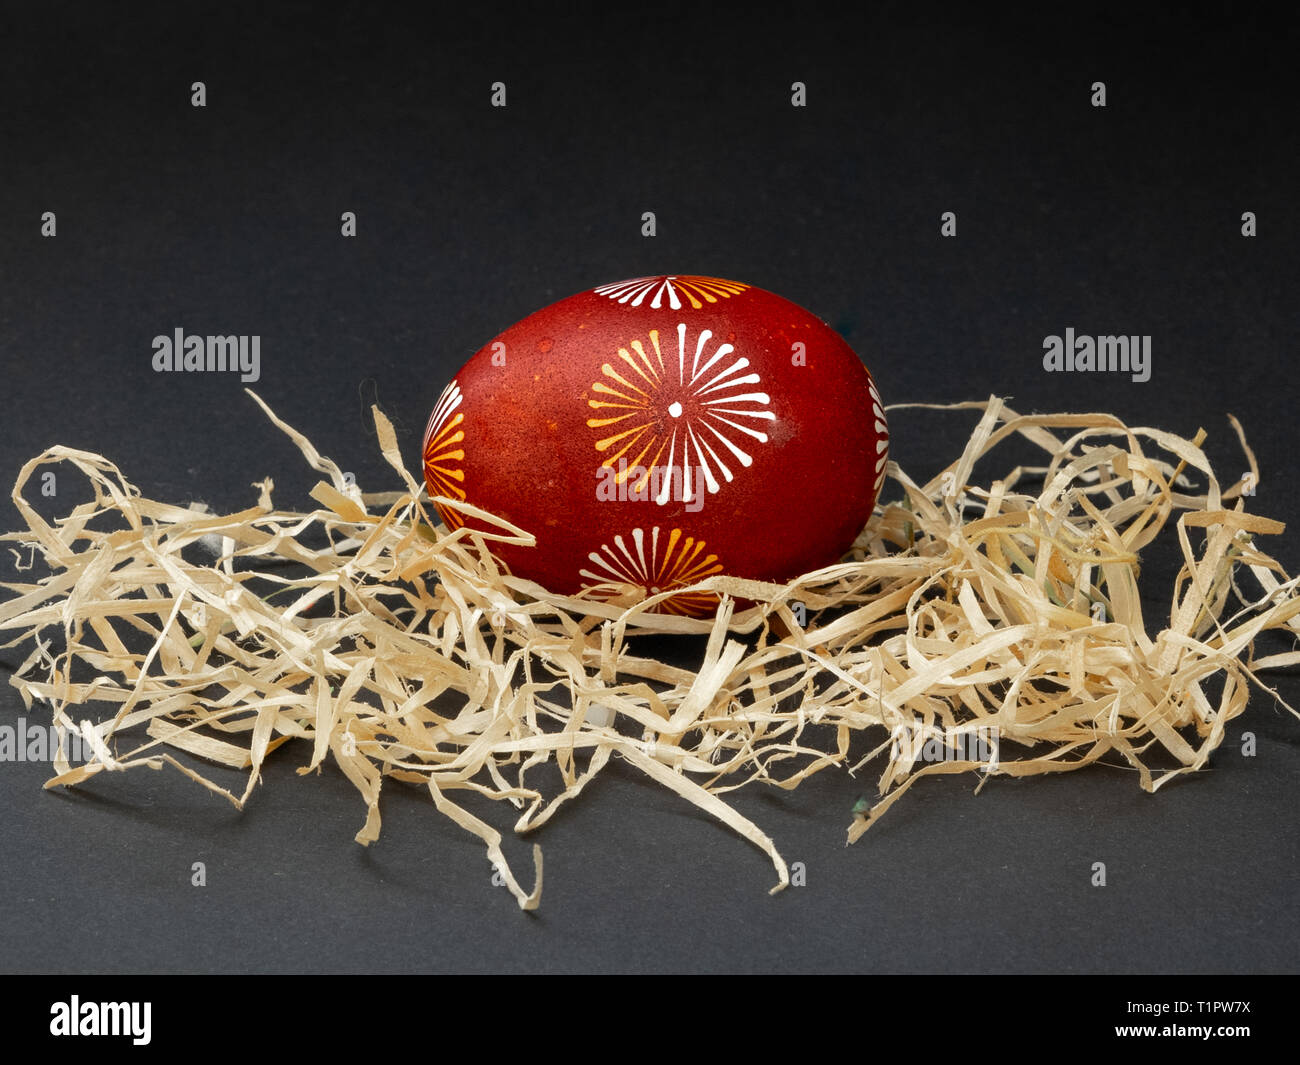 Wax resist red, white and yellow dyed traditional lithuanian Easter egg  in the straw on a black background. Close-up. Stock Photo